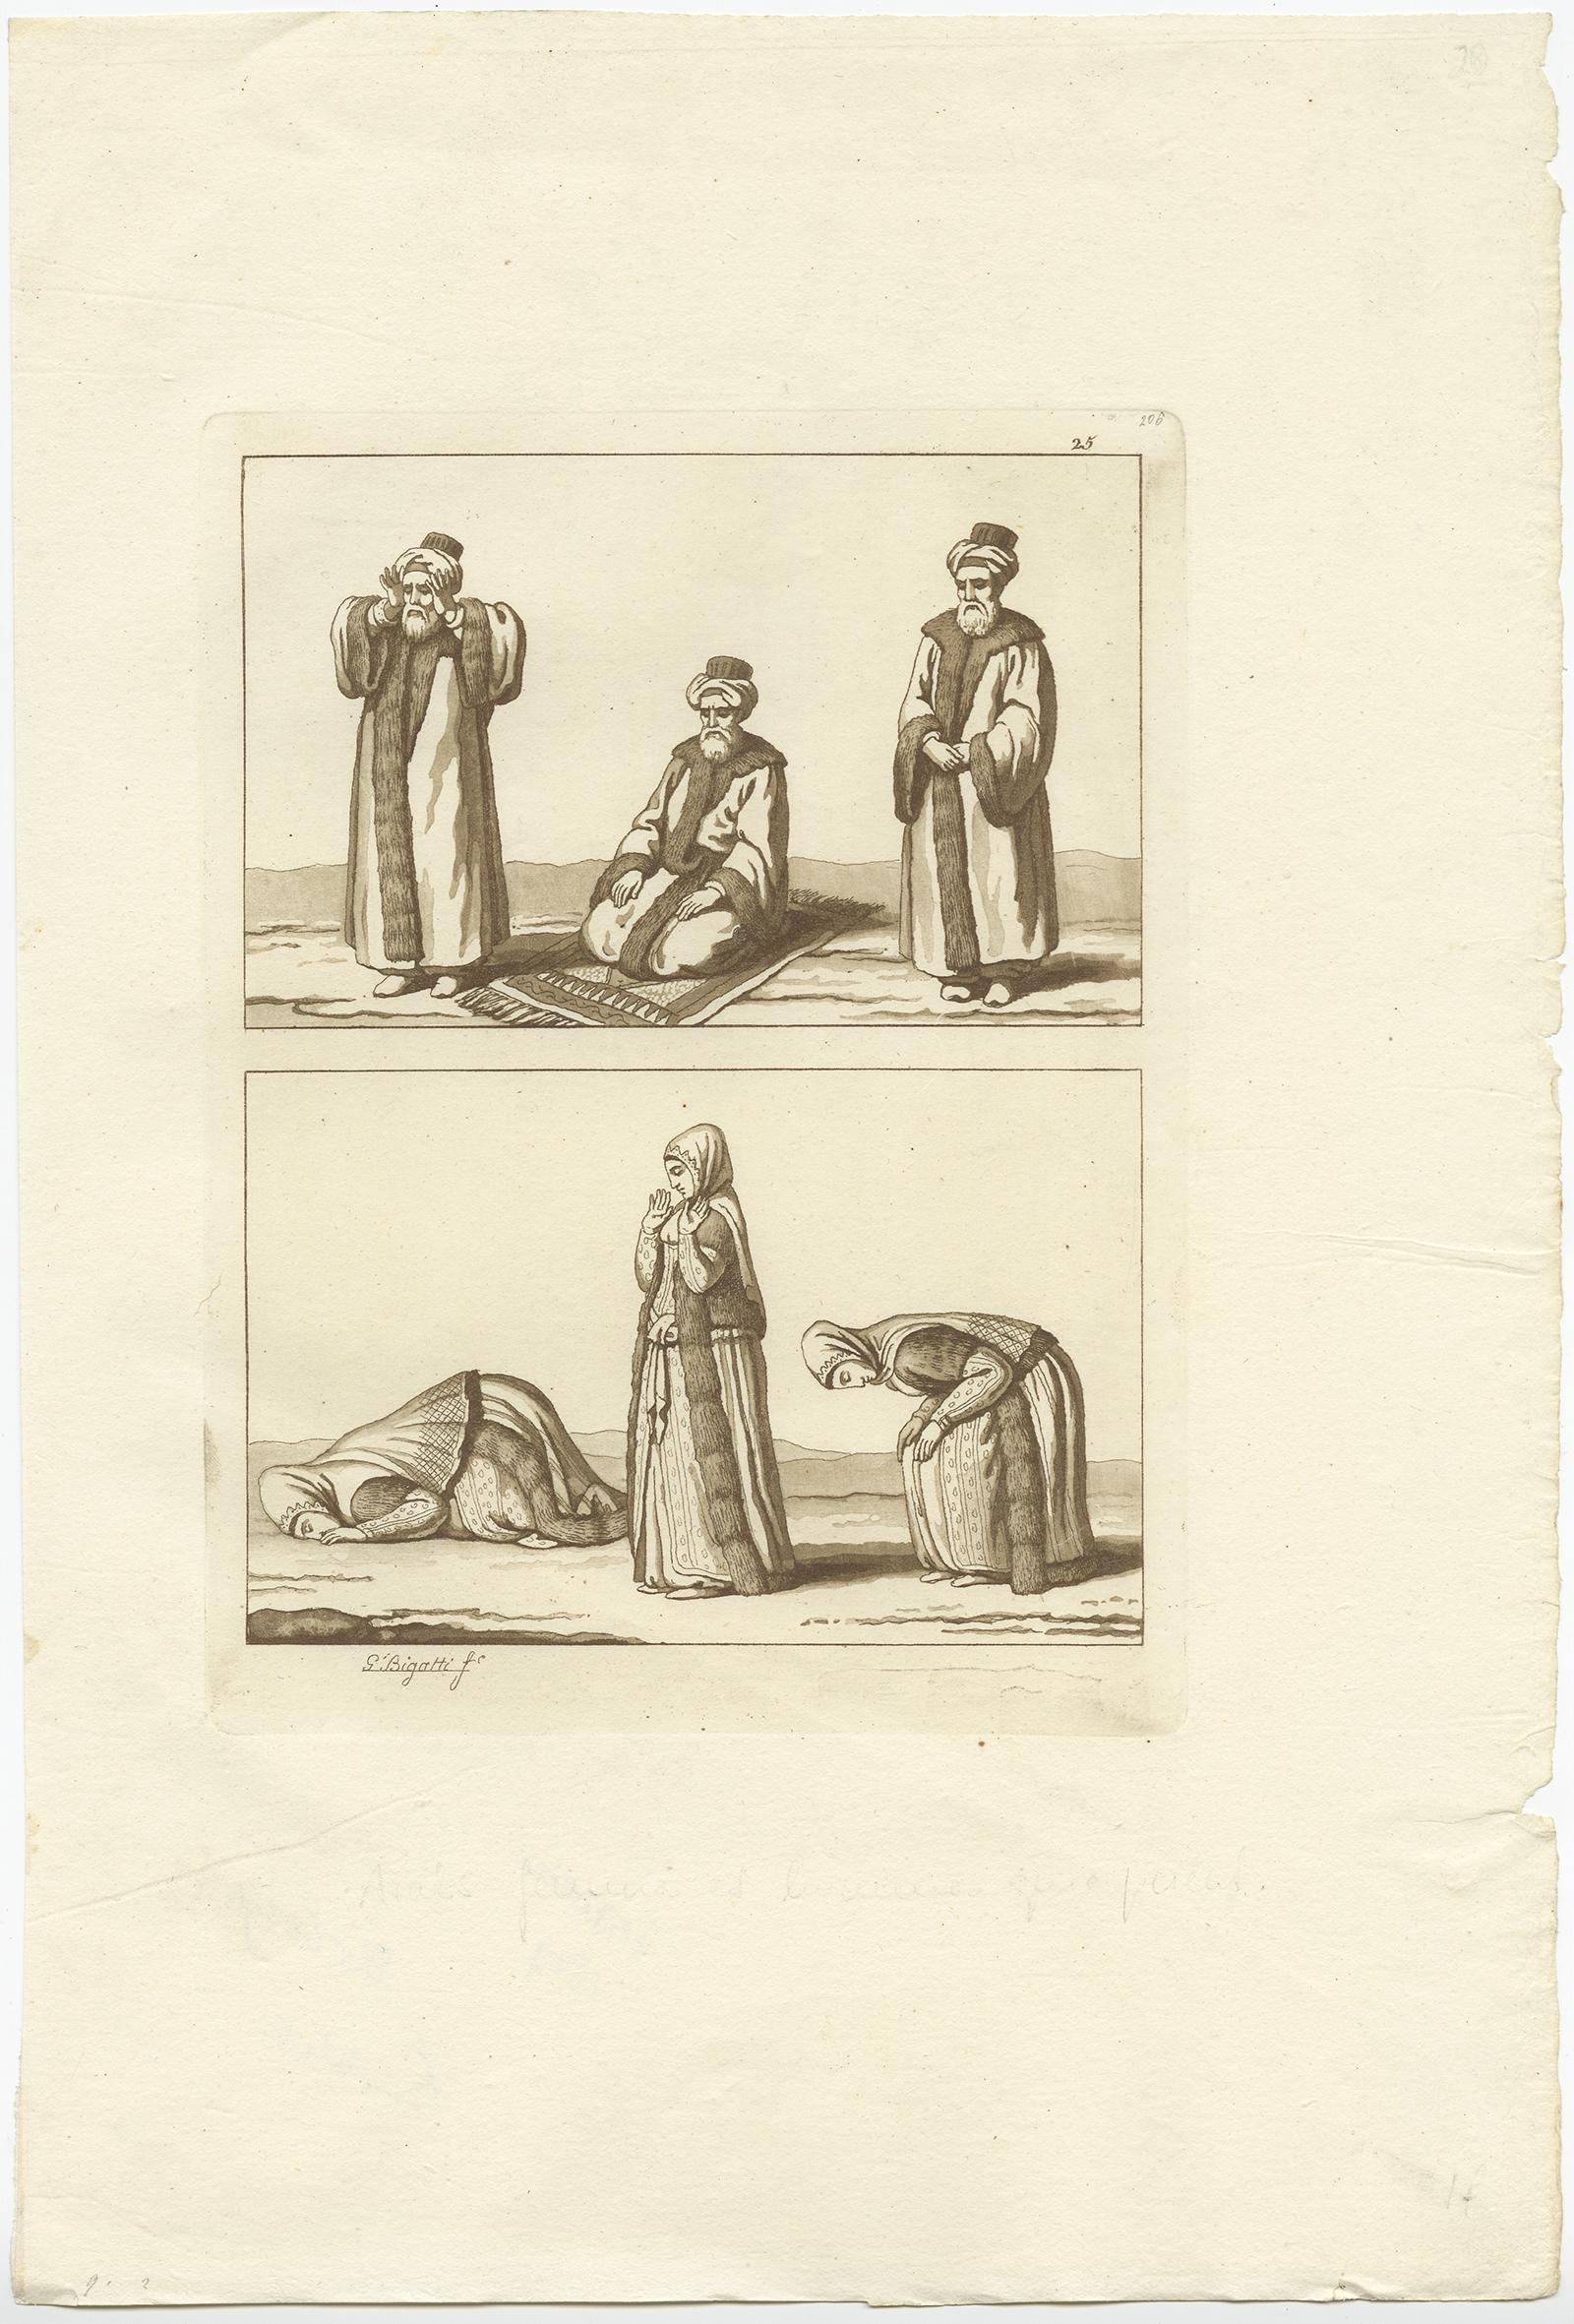 Untitled print depicting Arab men and women praying towards Mecca. 

This print originates from 'Il Costume Antico e Moderno ...' , by Giulio Ferrario, published in Milan in 21 volumes by Antonio Fortunato Stella in 1827 (first edition, second